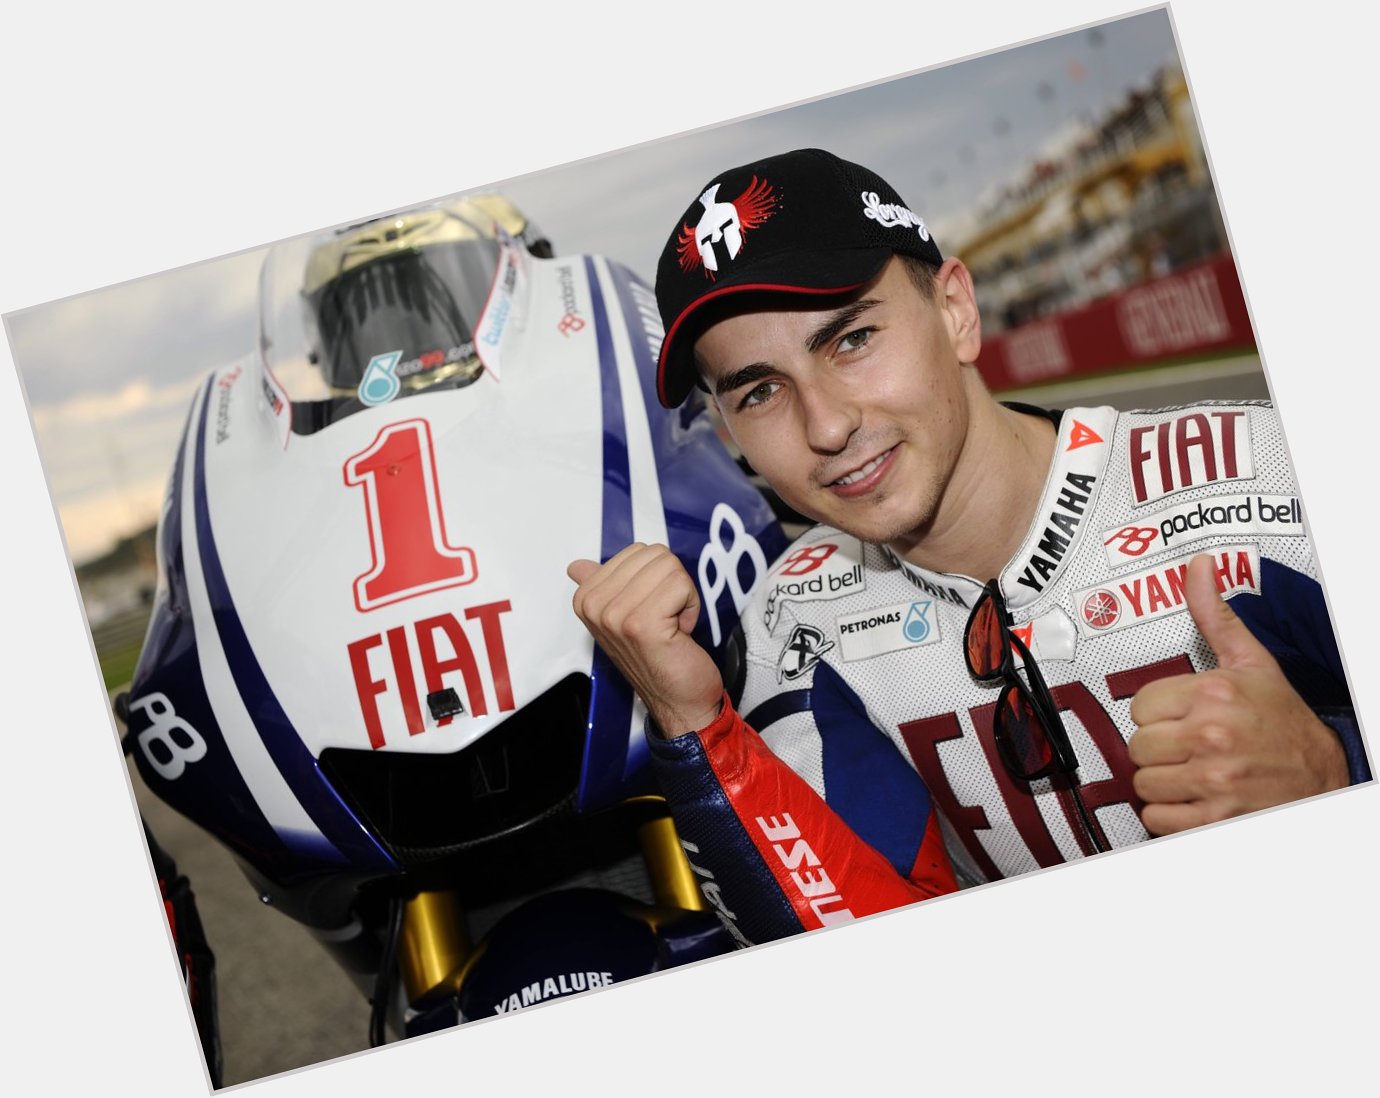 Happy 28th birthday to the one and only Jorge Lorenzo! Congratulations 